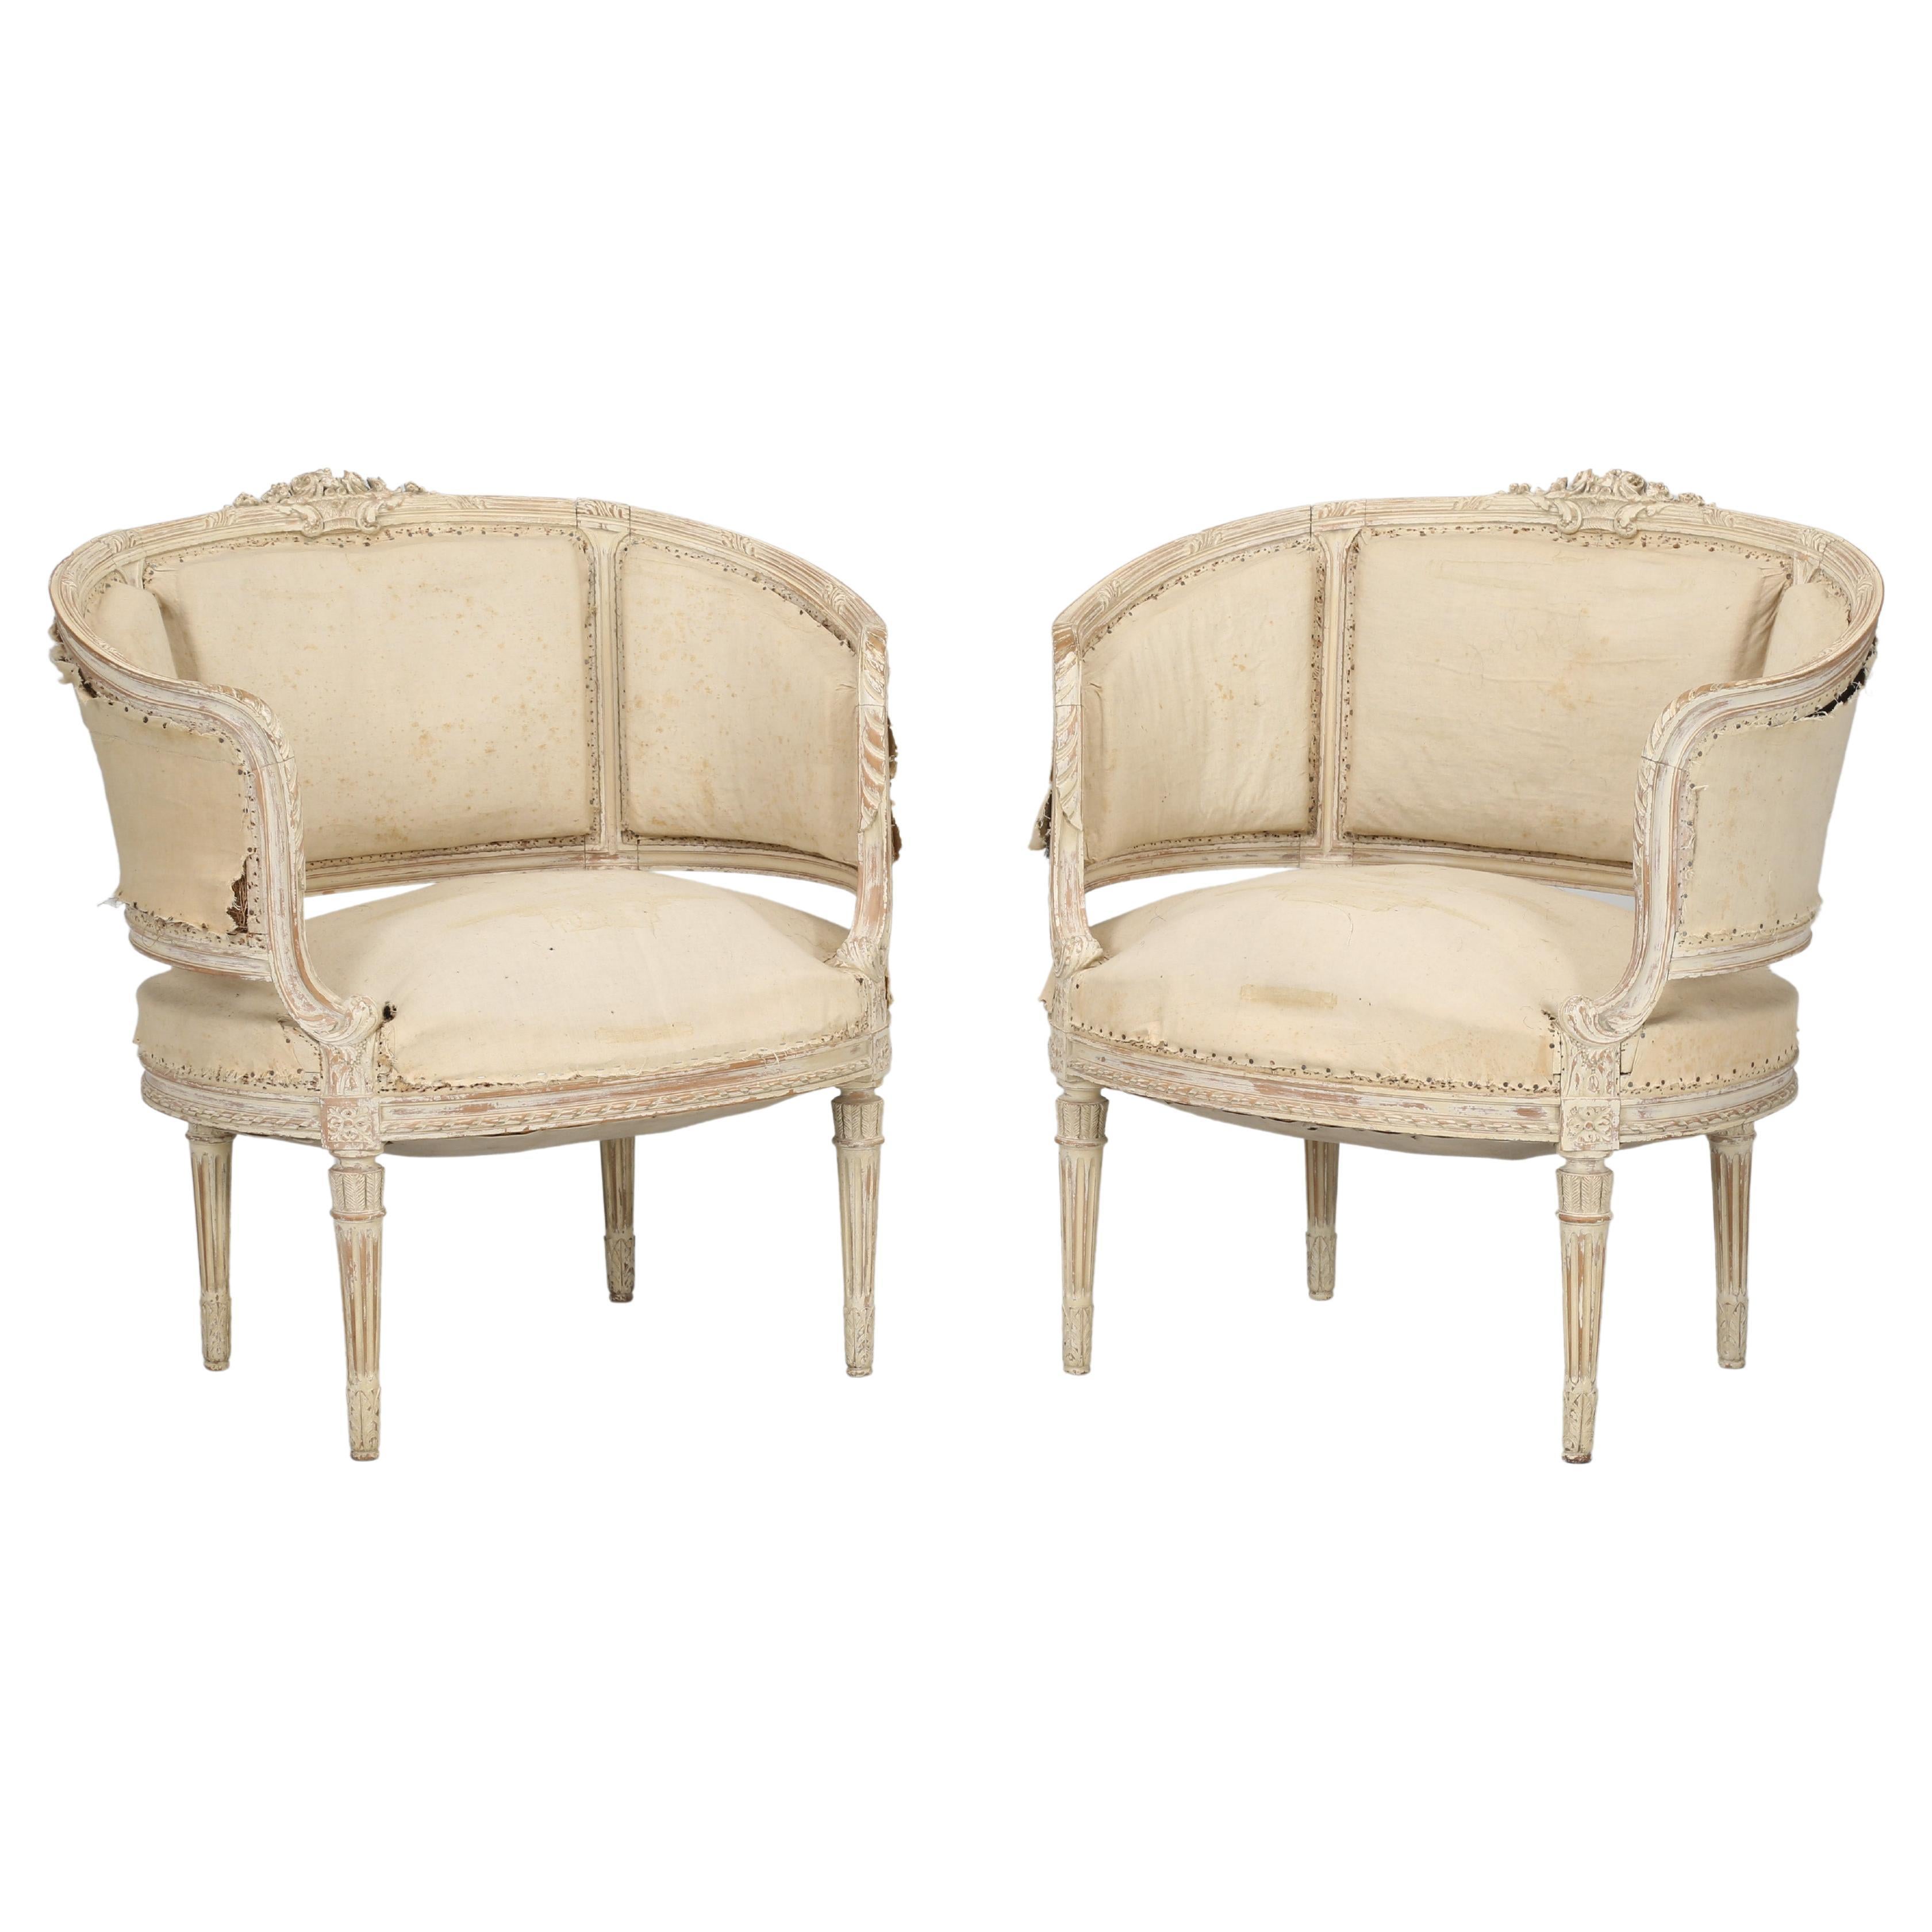 Antique Pair of Swedish Bergère Chairs in Louis XVI Style in Old Paint C1800's